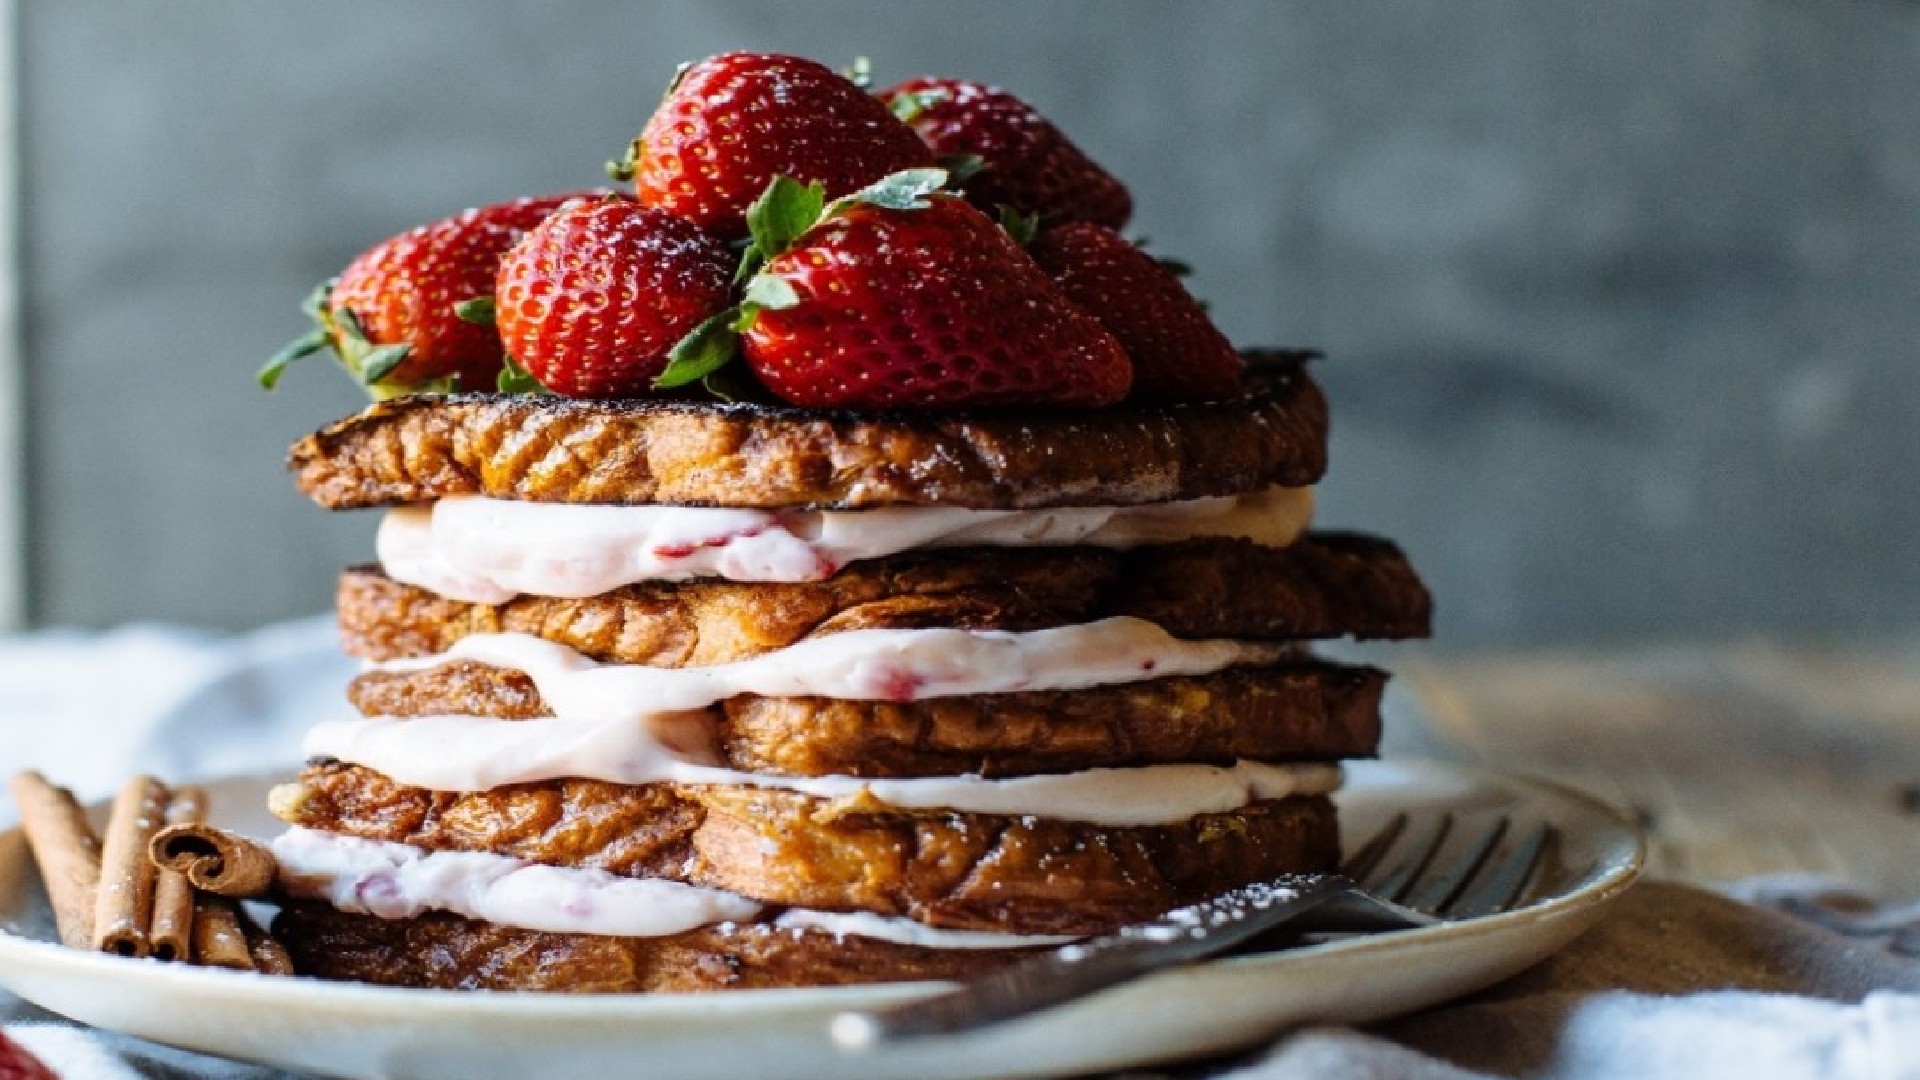 Eggspectation Dubai Launches Limited Edition French Toast Ahead Of National Strawberry Day